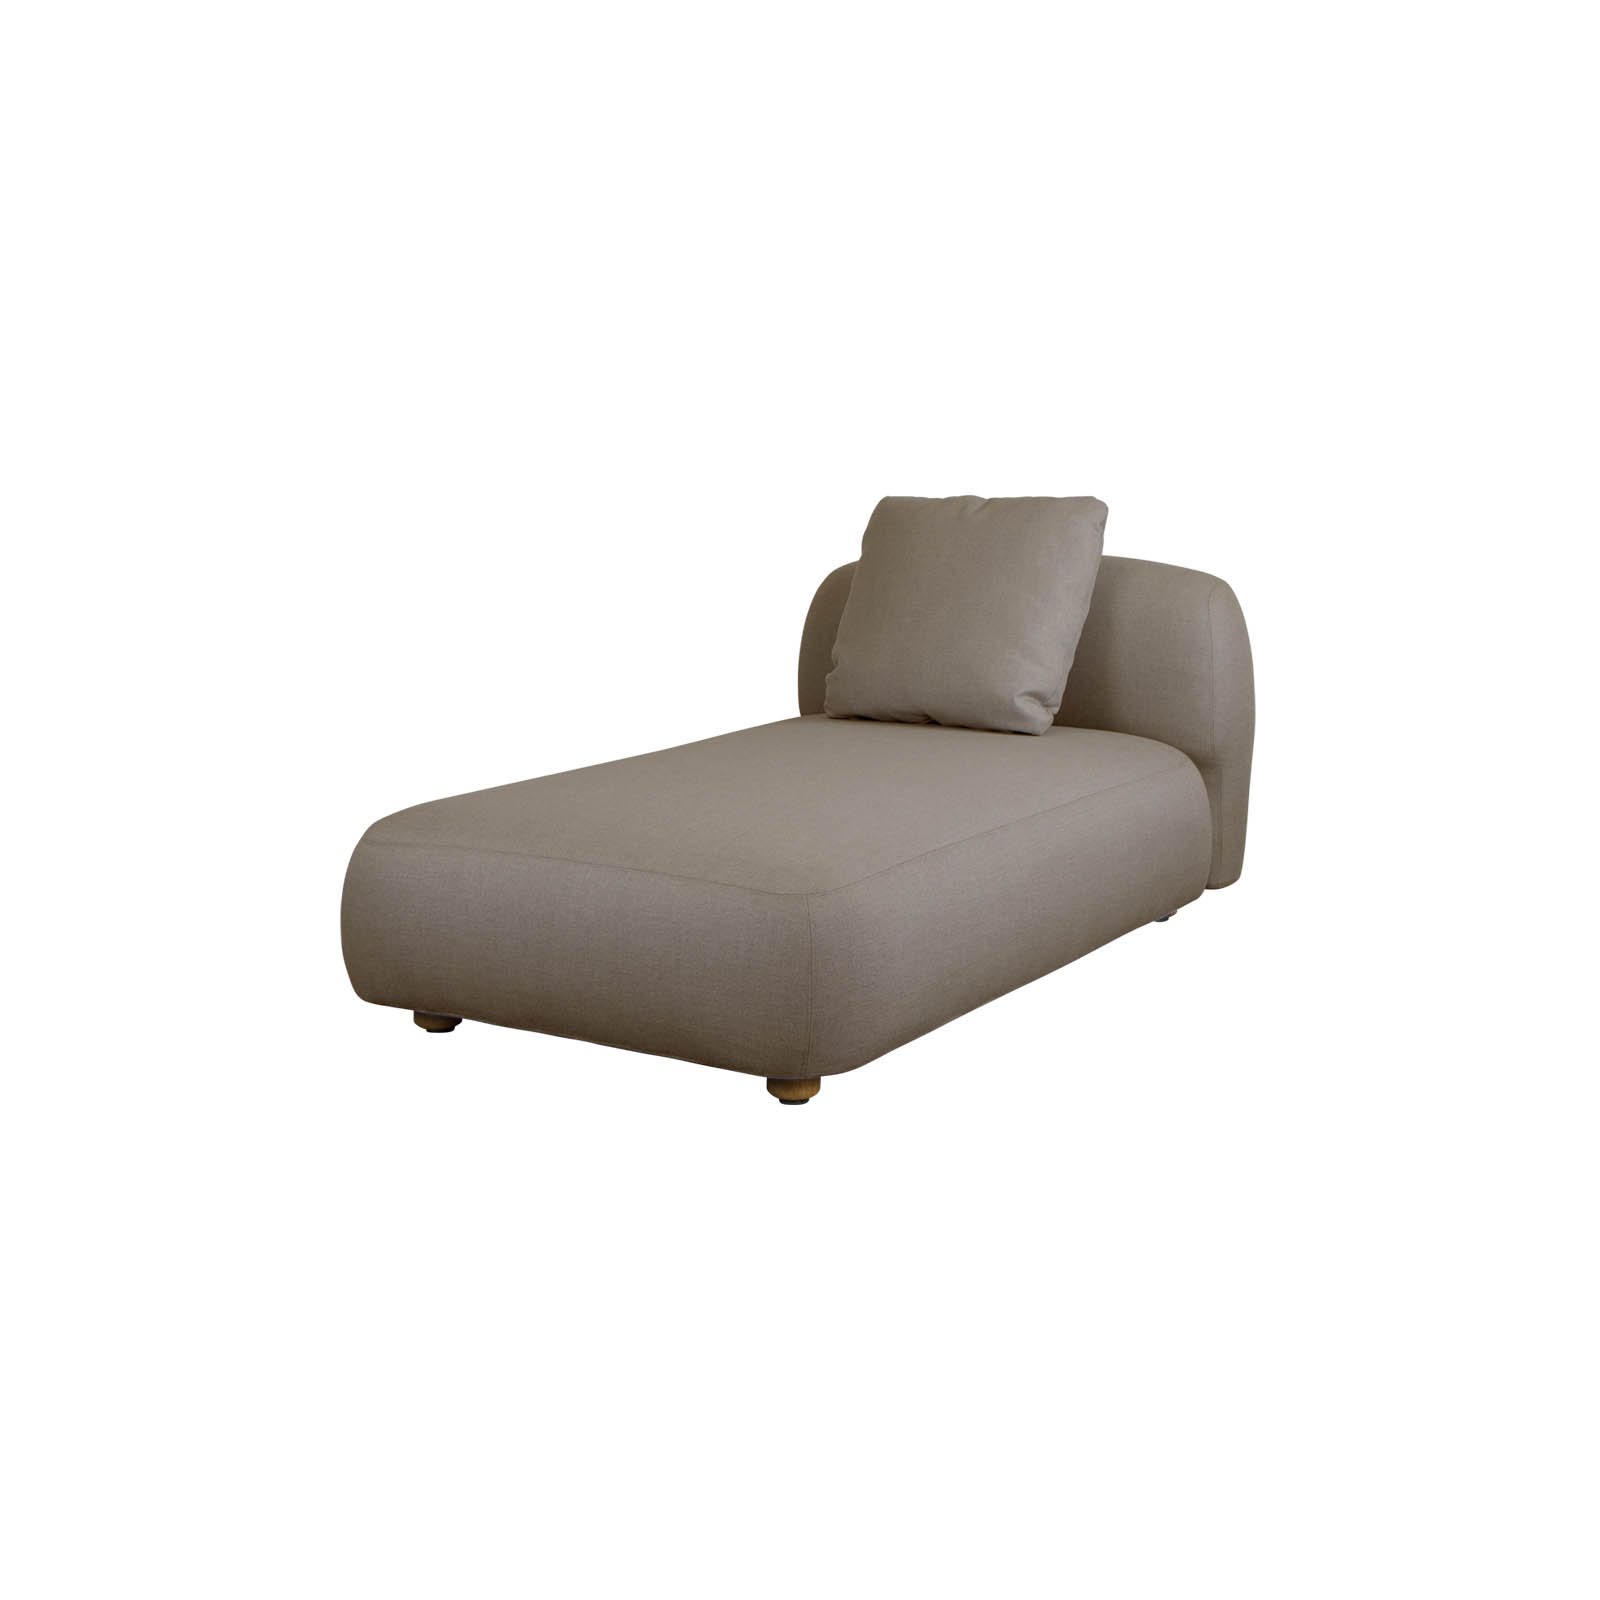 Chaiselongue ModulSofa Capture aus CL AirTouch mit QuickDry in Taupe